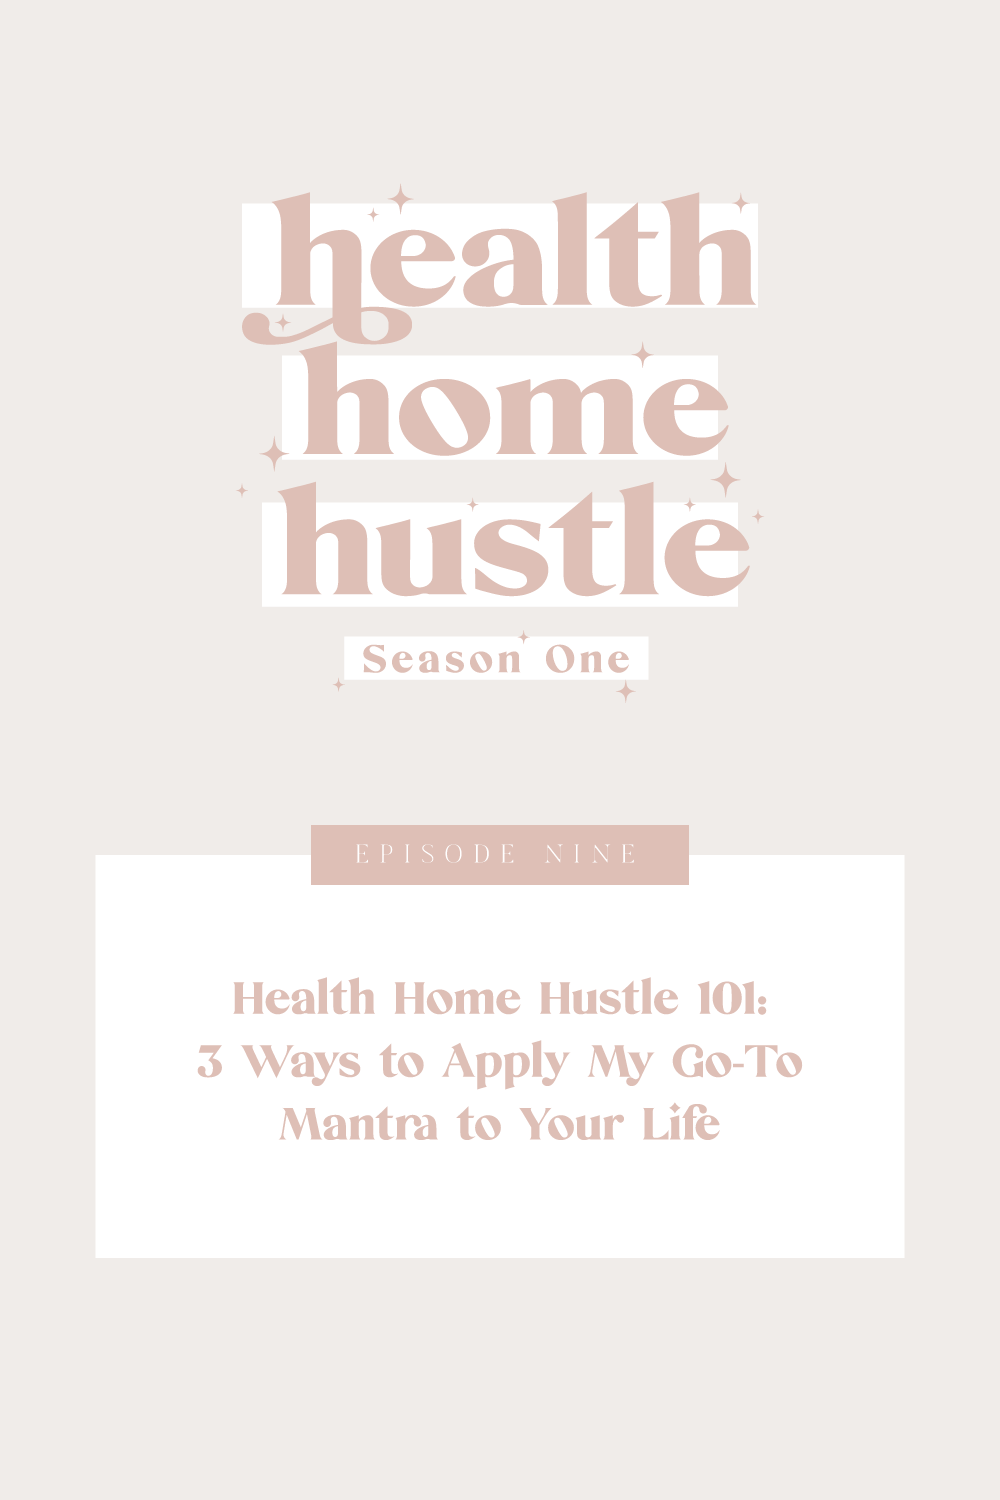 Health Home Hustle 101: 3 Ways to Apply My Go-To Mantra to Your Life